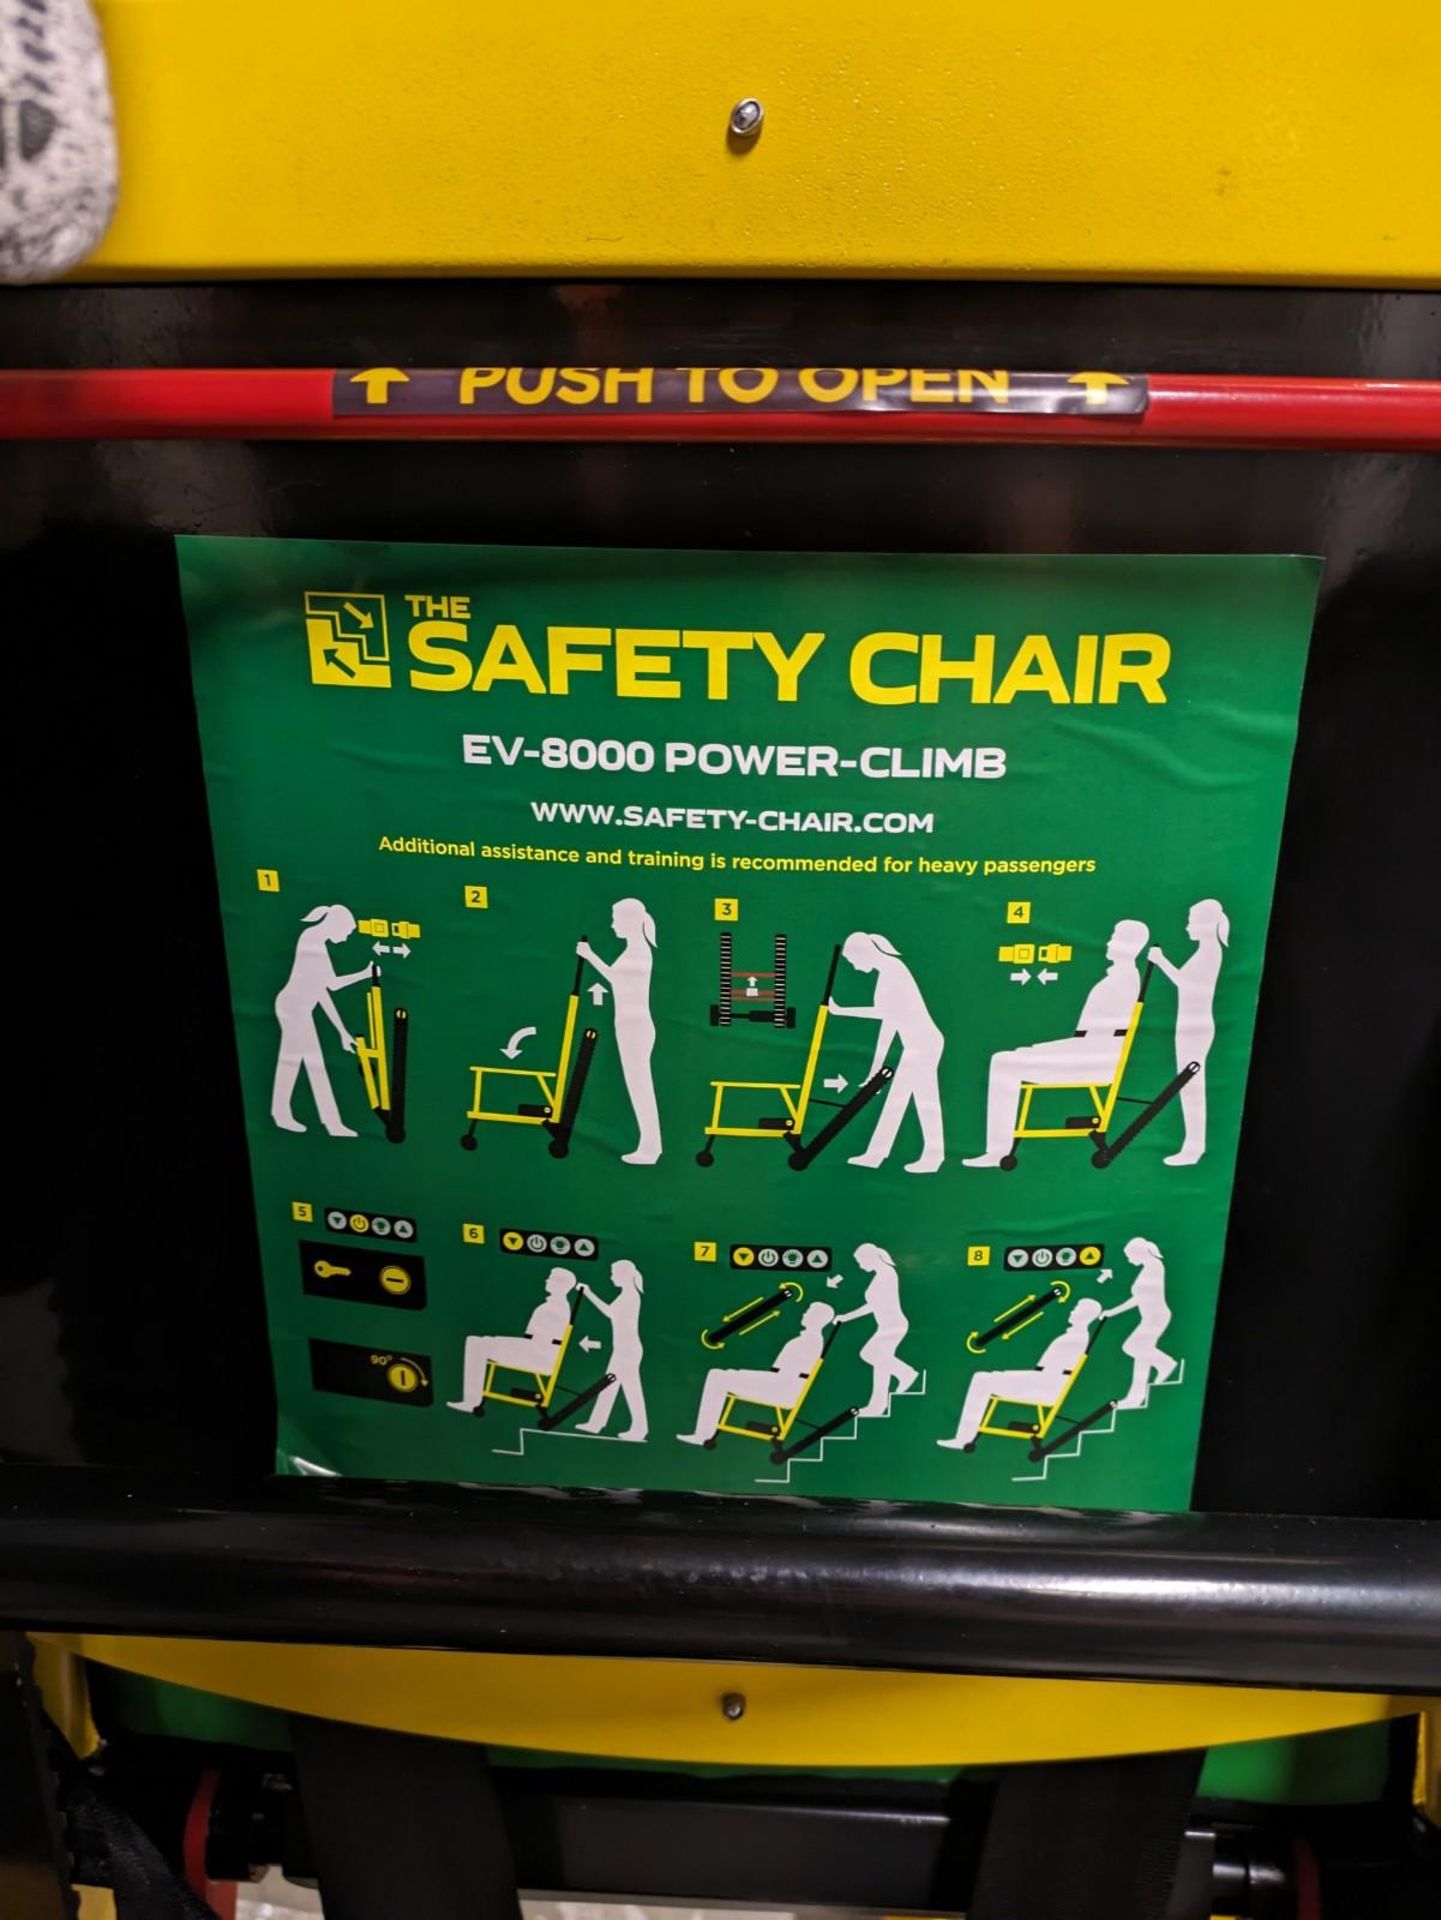 1 x EV-8000 Power-Climb Safety Chair - Image 2 of 4